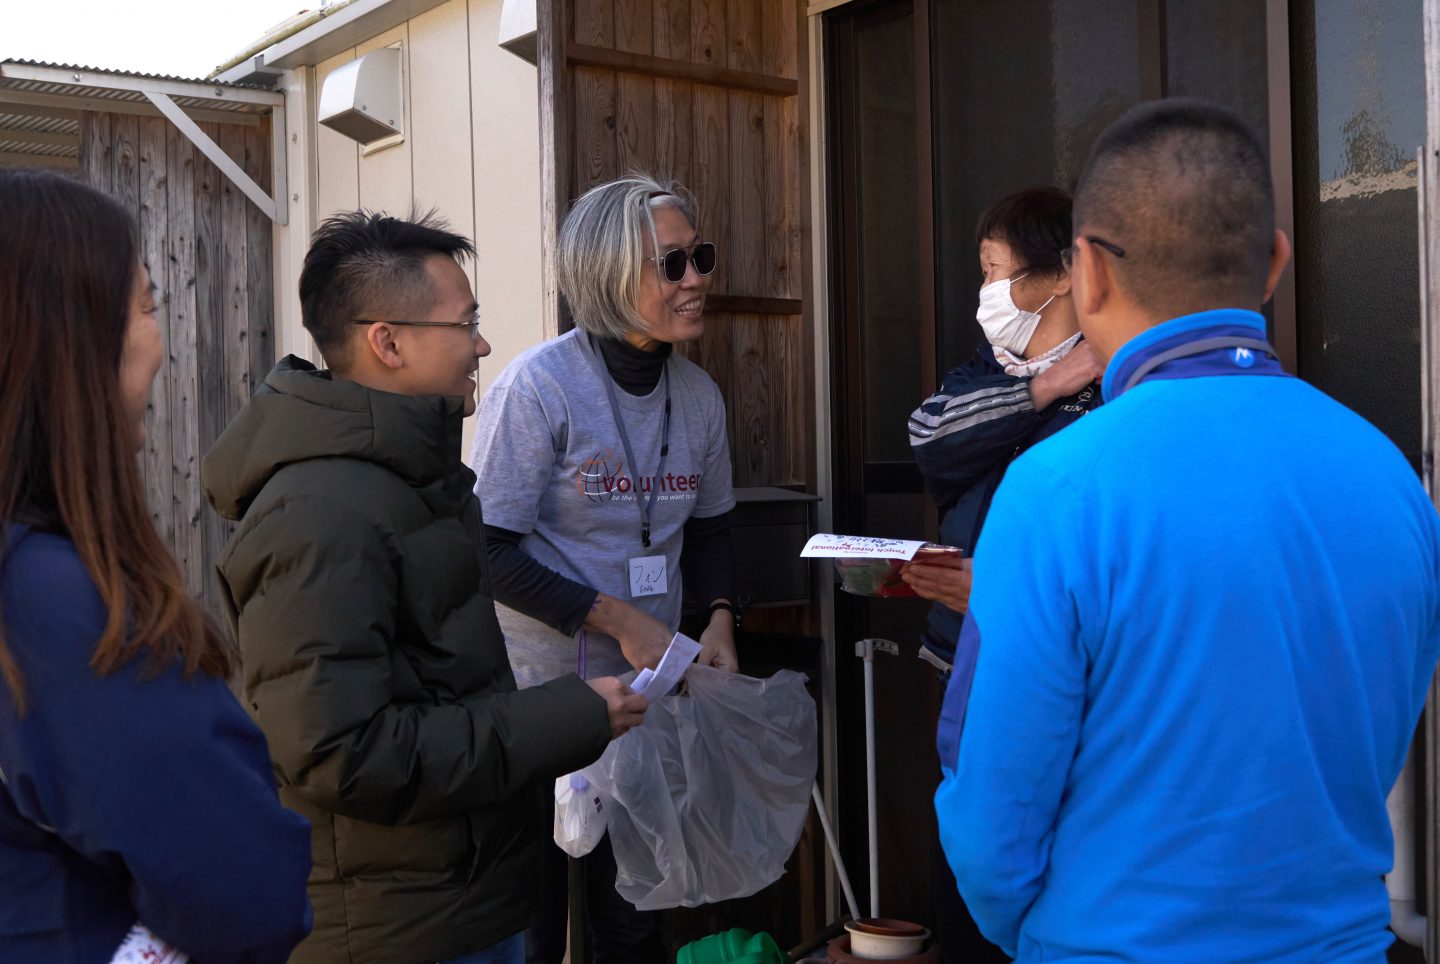 The author (second from left) with some of the TOUCH International team visiting residents still living in temporary housing in Kumamoto, Japan. It was a 10-day outreach organised by TOUCH International and their local partner. Photo courtesy of Wong Chun Han.